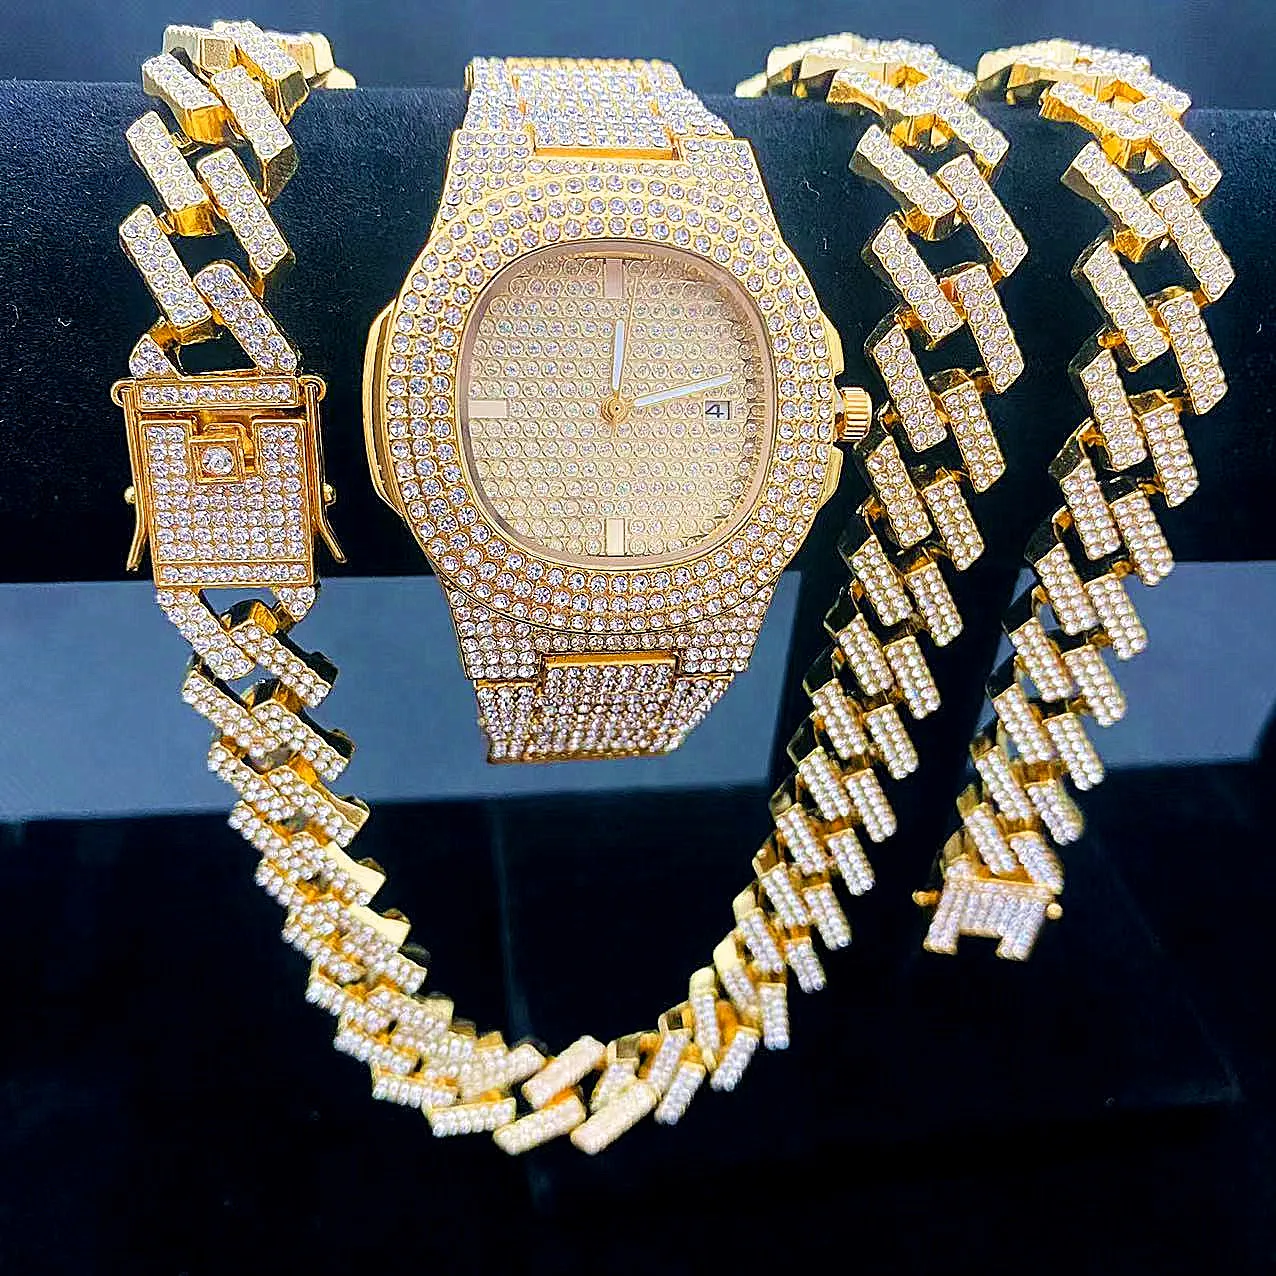 3PCS Iced Out Watches for Men Gold Watch Cuban Link Chains Bracelet Necklaces Diamond Hip Hop Jewelry Set for Men's Watch Luxury